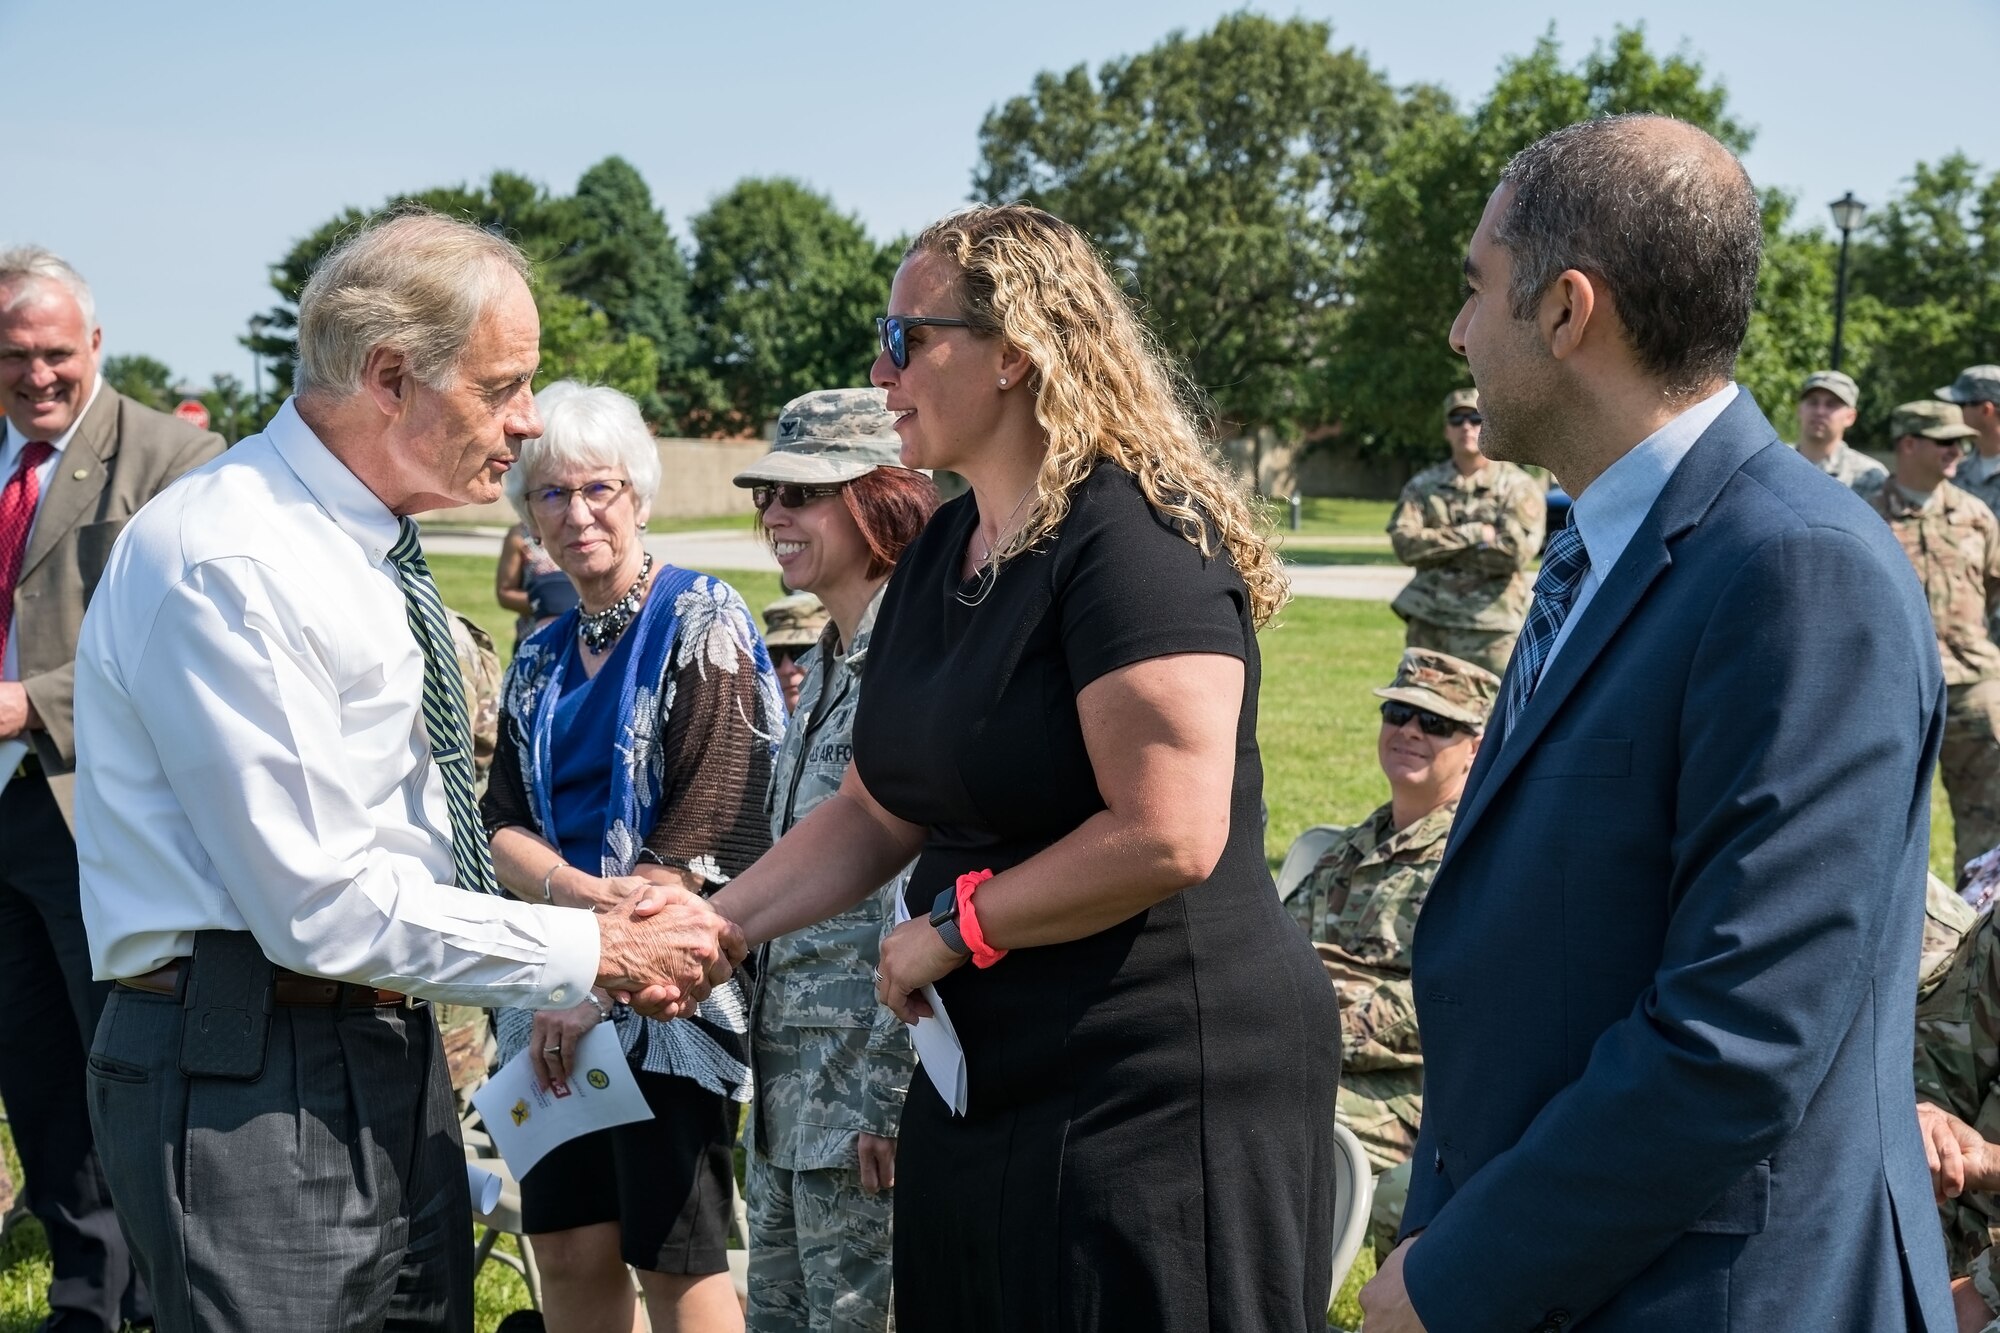 Sen. Tom Carper, D-Del., shakes hands with Jessica Marelli, Caesar Rodney School District Board of Education president, Camden, Del.; prior to the start of a groundbreaking ceremony for the new Welch Elementary School/Dover Air Base Middle School June 3, 2019, in the family housing area at Dover Air Force Base, Del. The $48 million project, federally funded by the Department of Defense Education Activity, will be built on the football field across the street from the Youth Center and adjacent to the existing elementary and middle schools. Scheduled to open at the beginning of the 2021 school year, the new building will have over 105,000 square feet of learning space for approximately 490 students. (U.S. Air Force photo by Roland Balik)